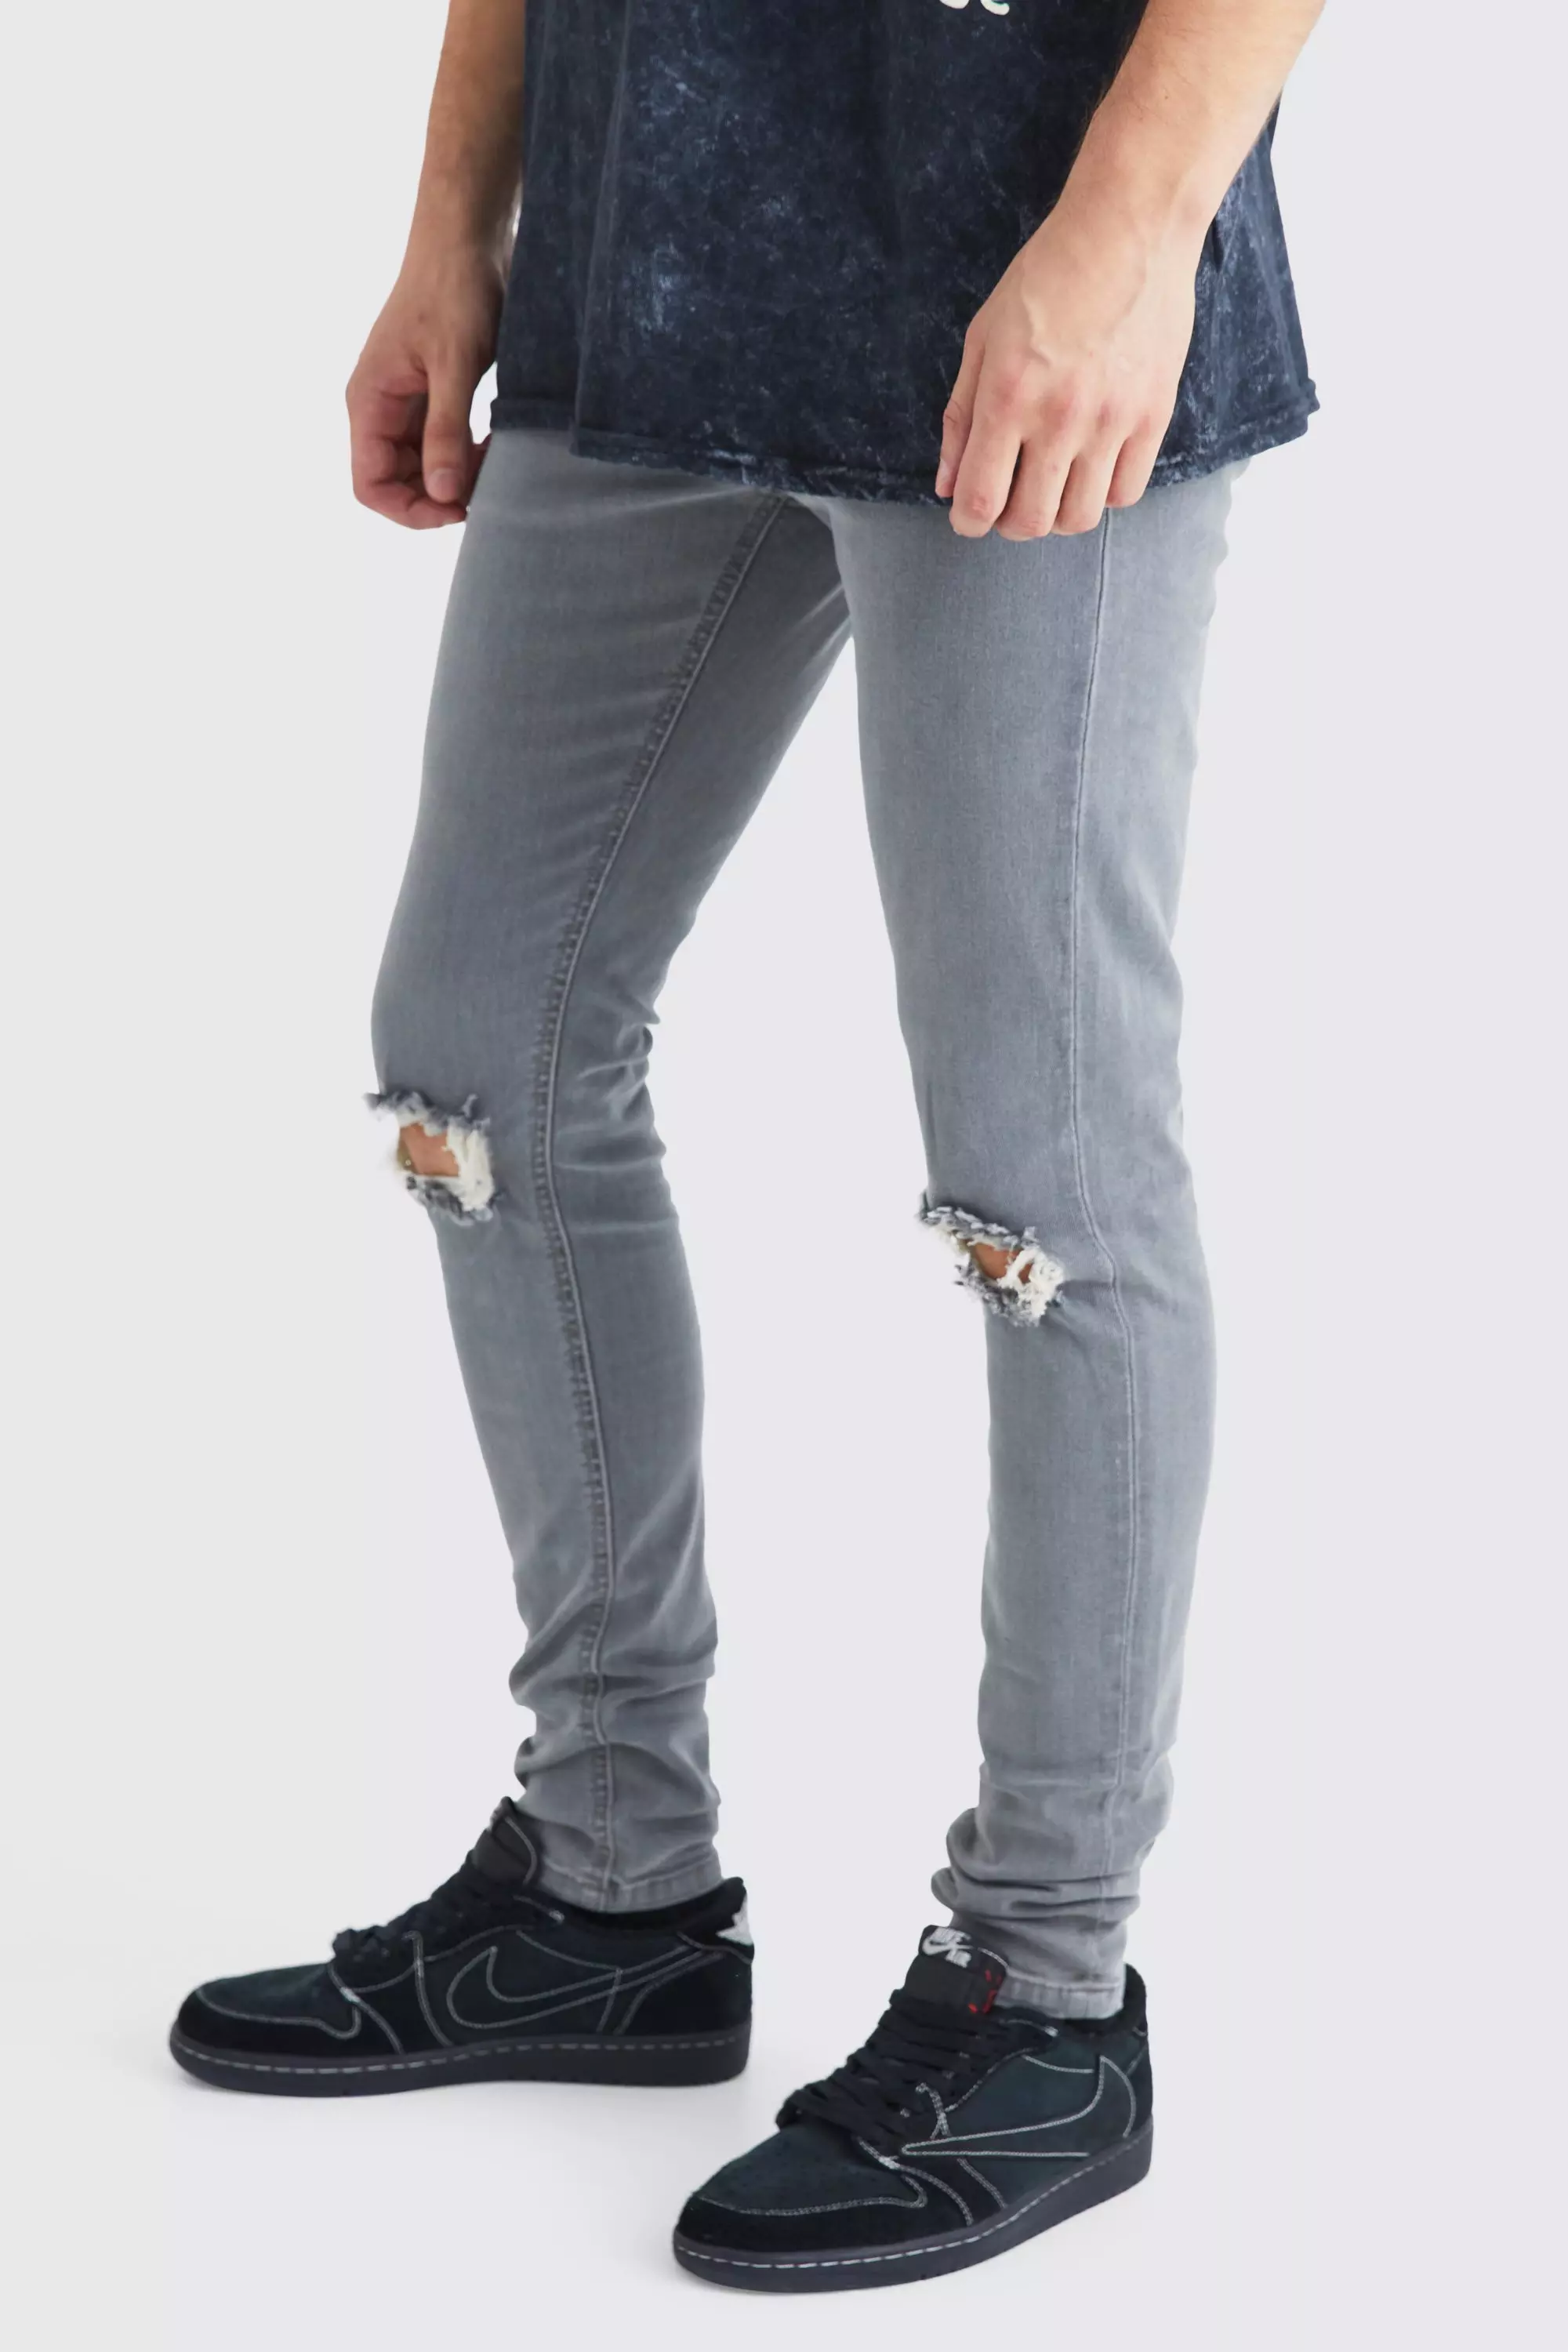 Grey Tall Super Skinny Stretch Ripped Knee Jeans